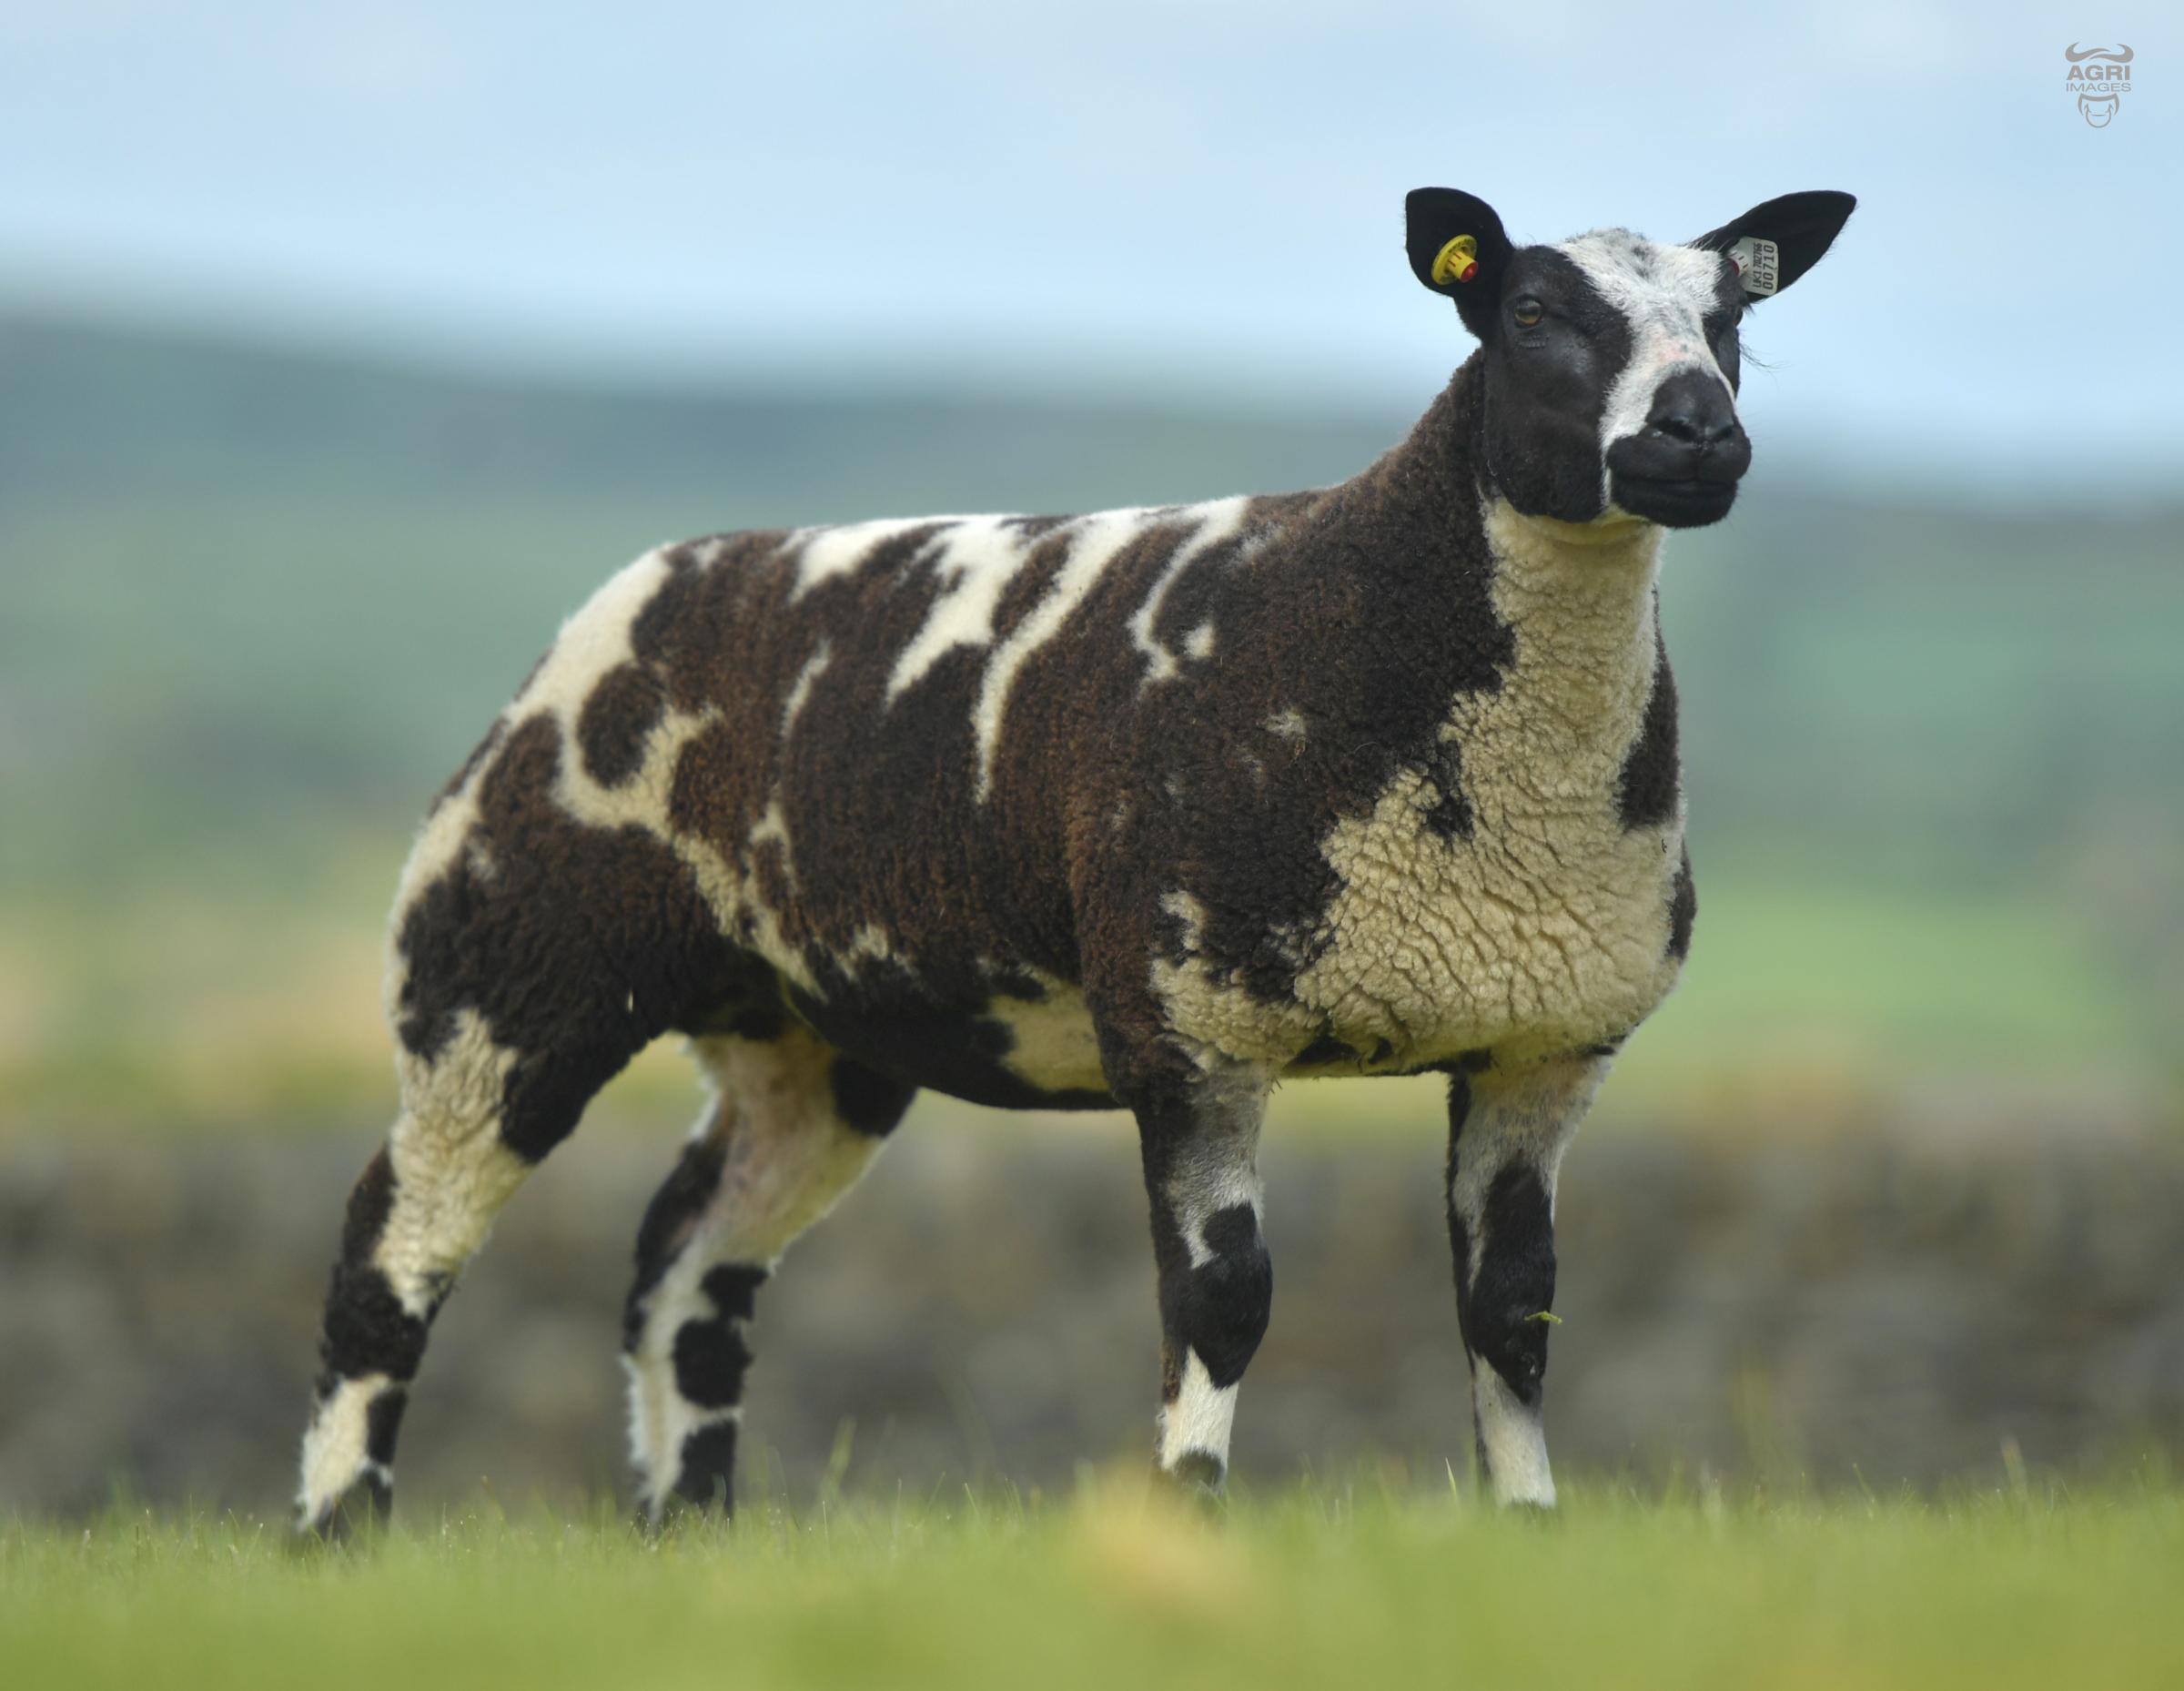 Diamond Emilia topped the Dutch Spotted section at £4500